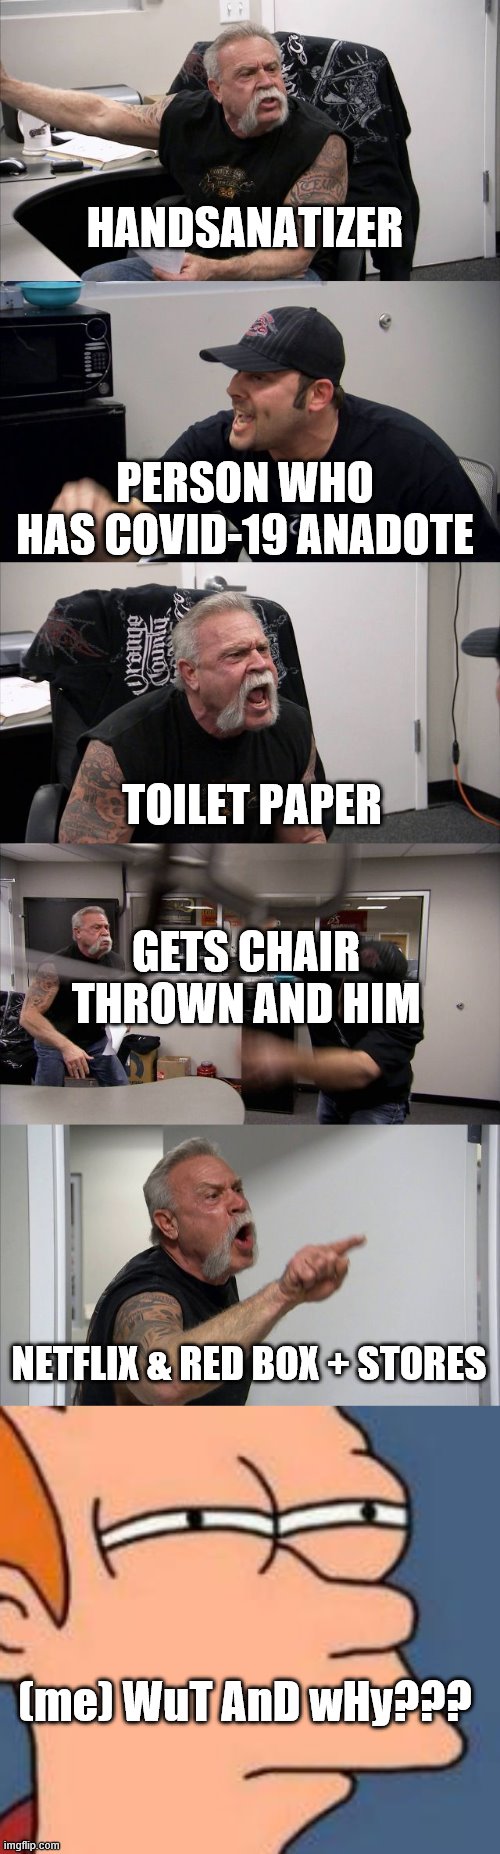 HANDSANATIZER; PERSON WHO HAS COVID-19 ANADOTE; TOILET PAPER; GETS CHAIR THROWN AND HIM; NETFLIX & RED BOX + STORES; (me) WuT AnD wHy??? | image tagged in memes,futurama fry,american chopper argument | made w/ Imgflip meme maker